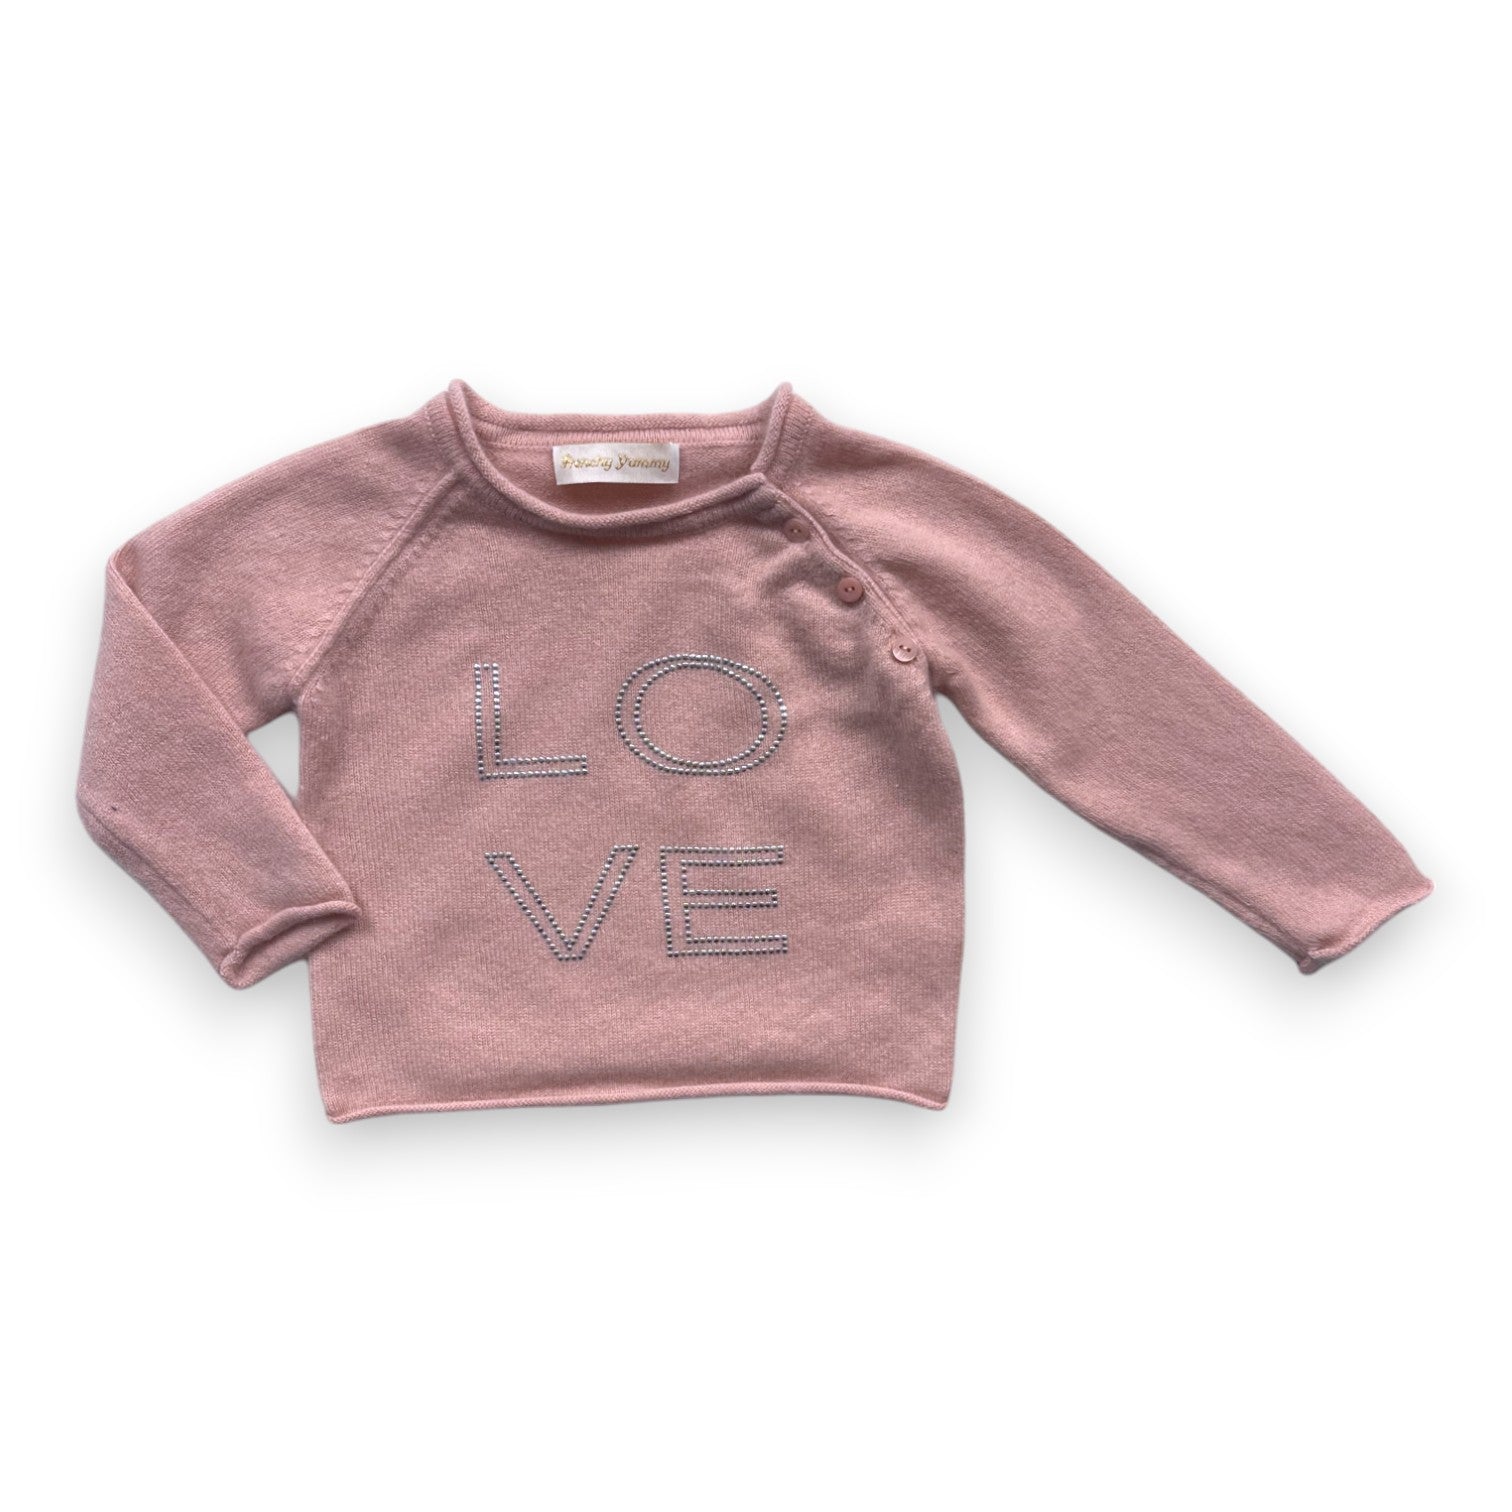 FRENCHY YUMMY - Pull rose love en cachemire - 6 mois